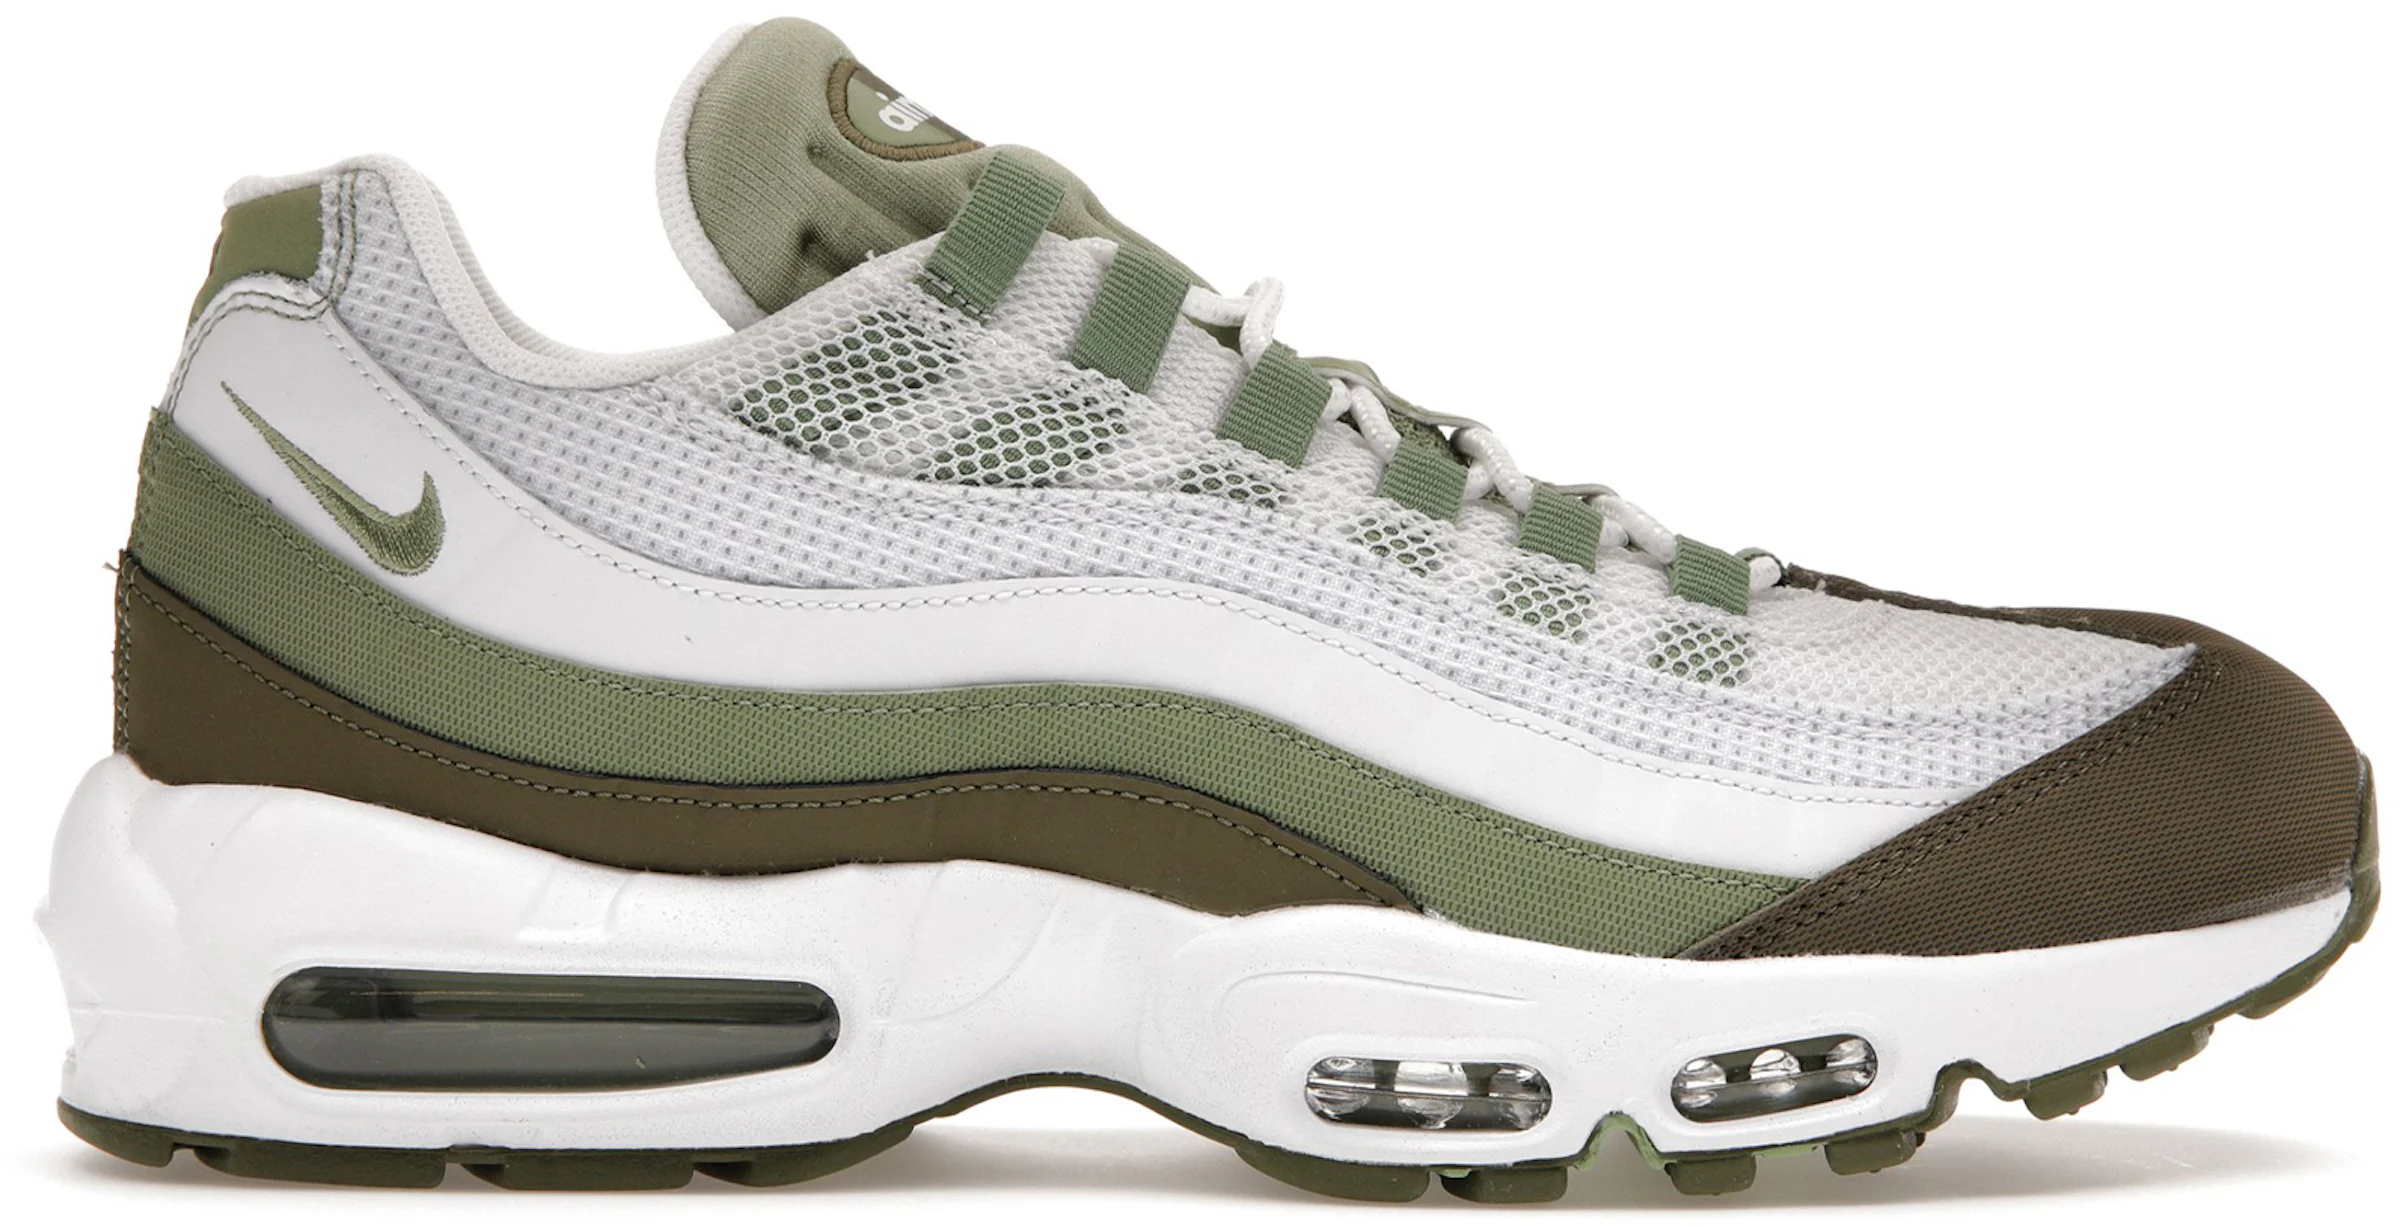 https://images.stockx.com/images/Nike-Air-Max-95-White-Olive-Product.jpg?fit=fill&bg=FFFFFF&w=1200&h=857&fm=webp&auto=compress&dpr=2&trim=color&updated_at=1682532582&q=60